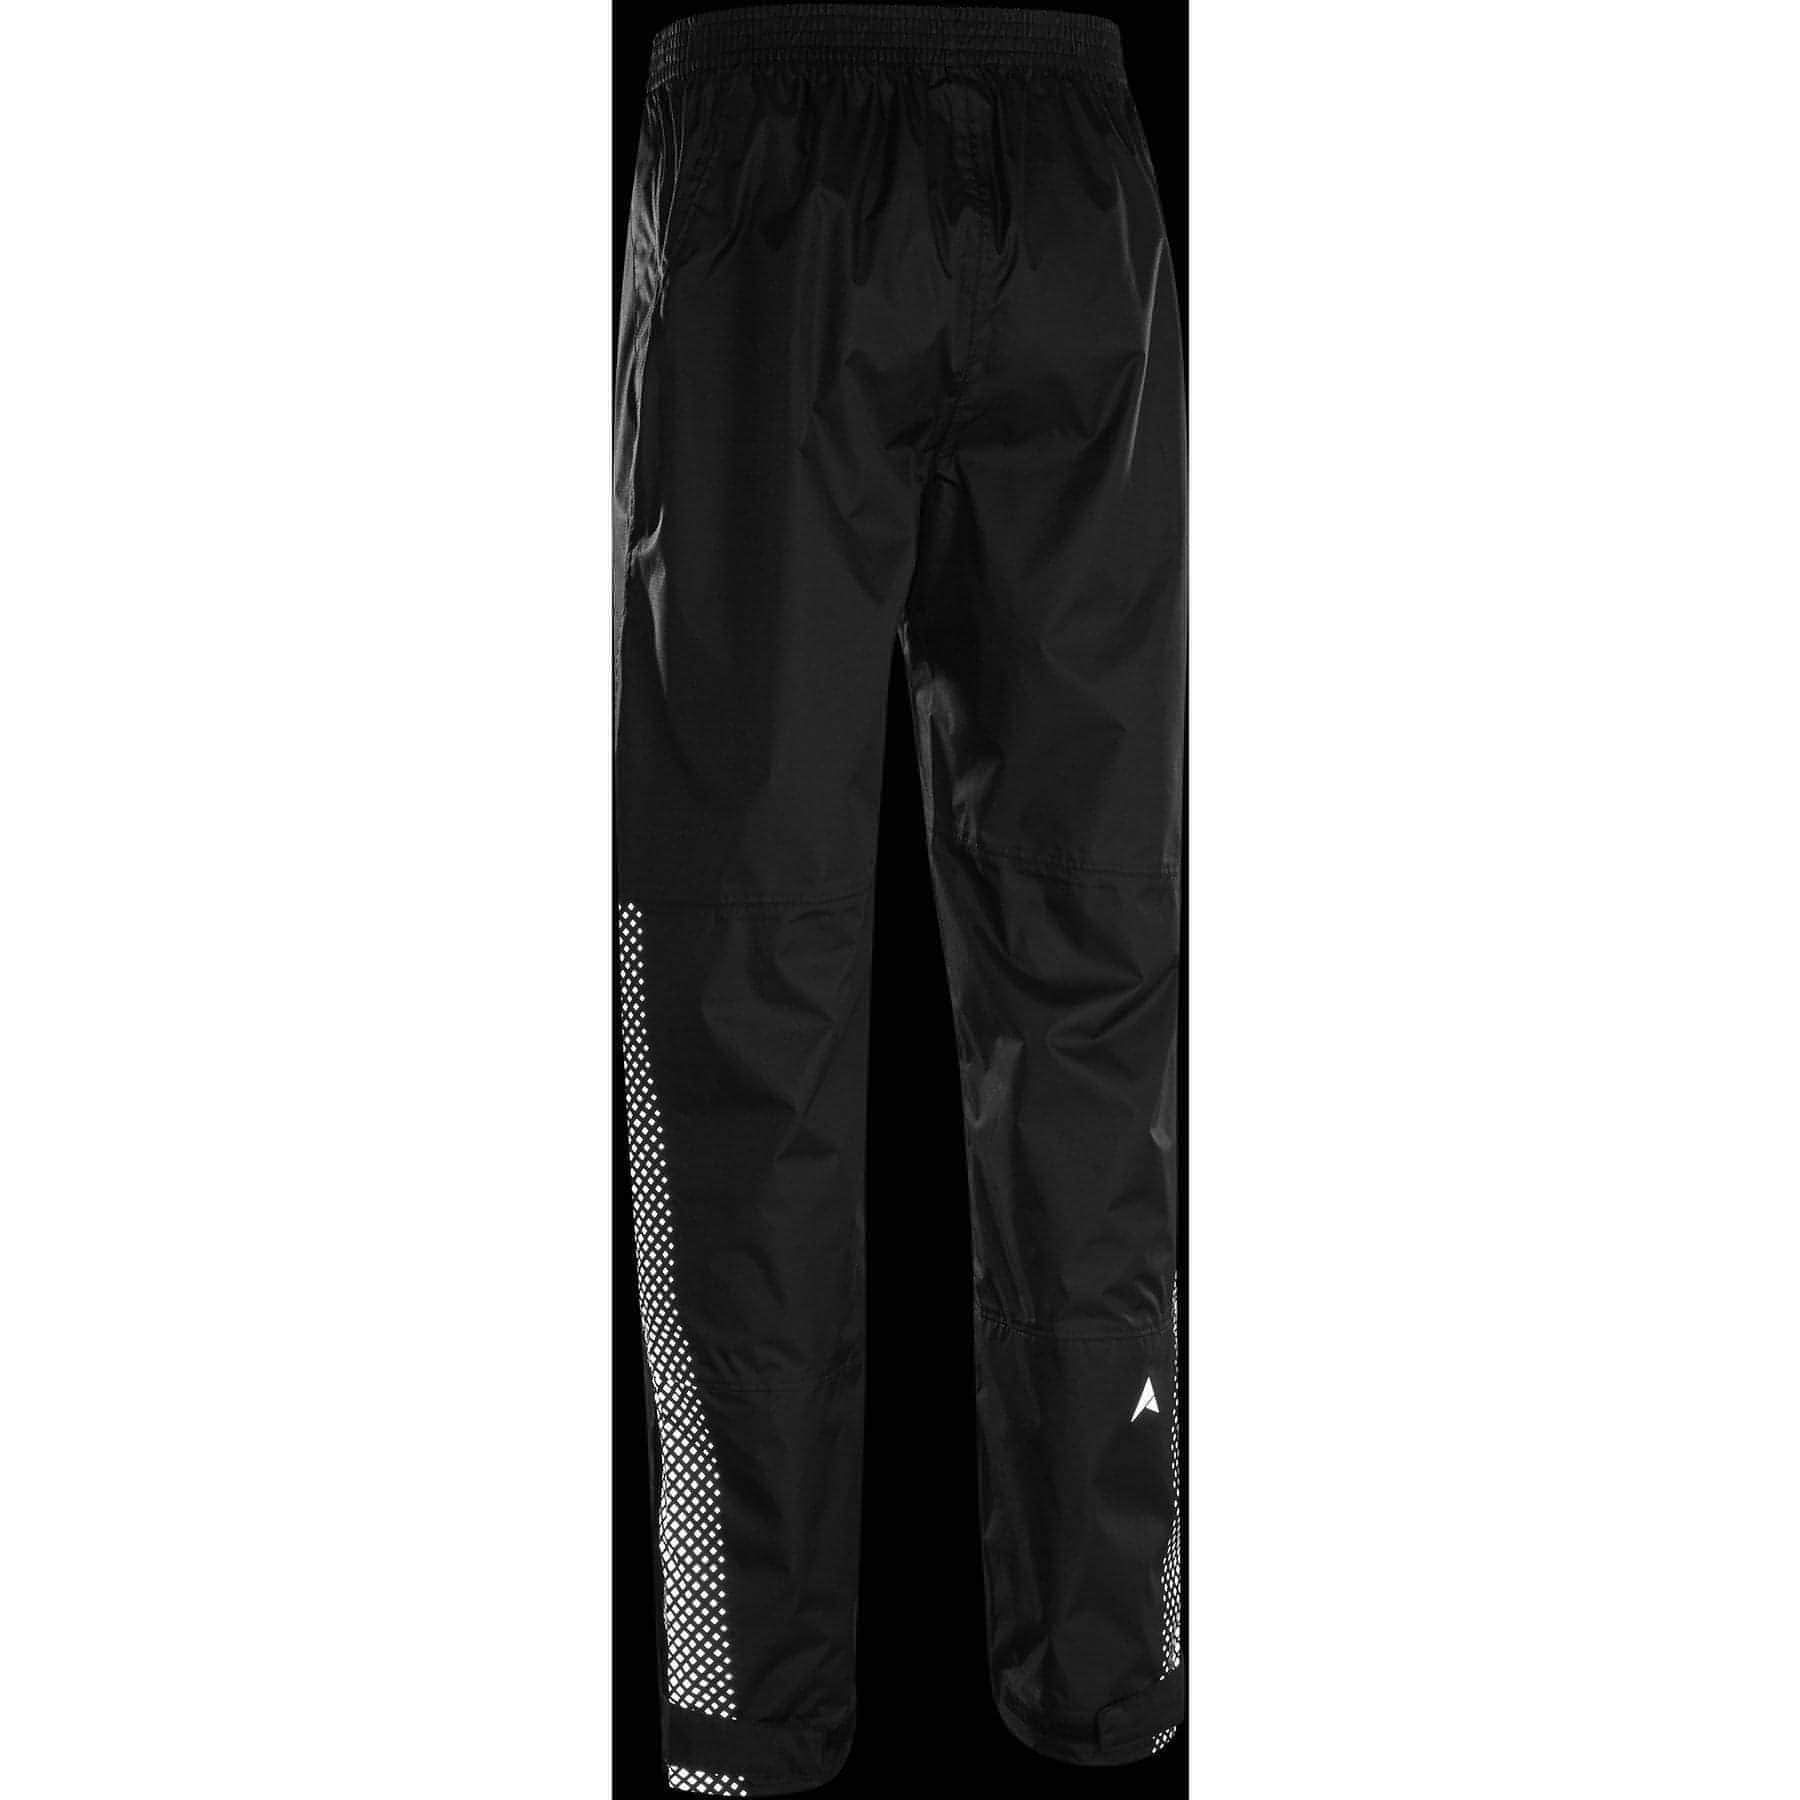 Altura Nightvision Mens Cycling Over Trousers - Black - Start Fitness